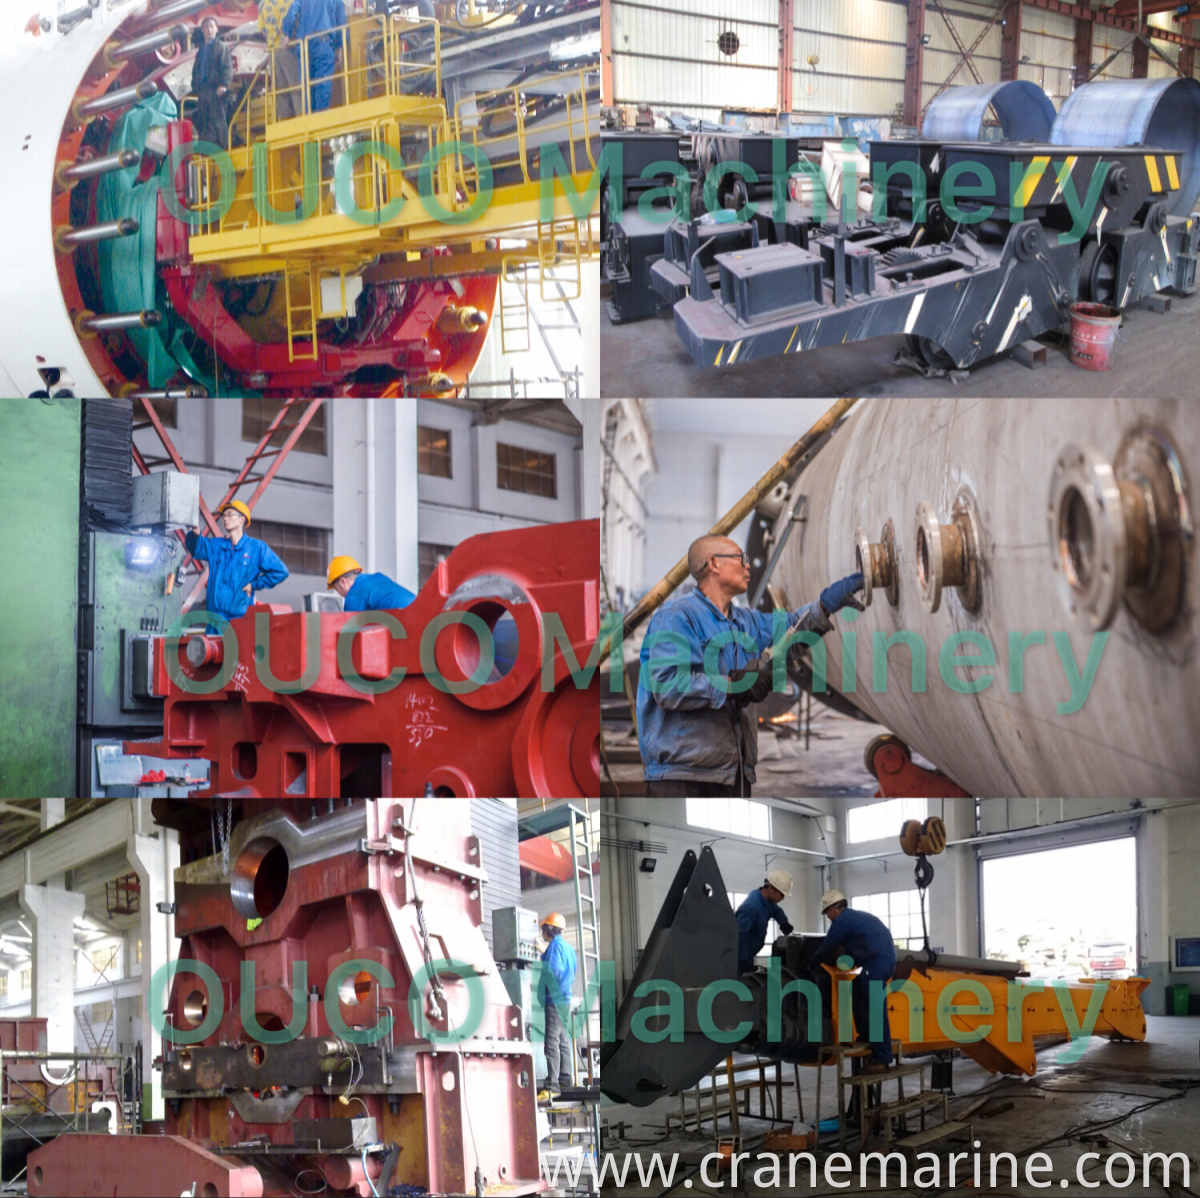 36.6m boom length marine crane with telescopic cylinder crane offshore crane ABS certified